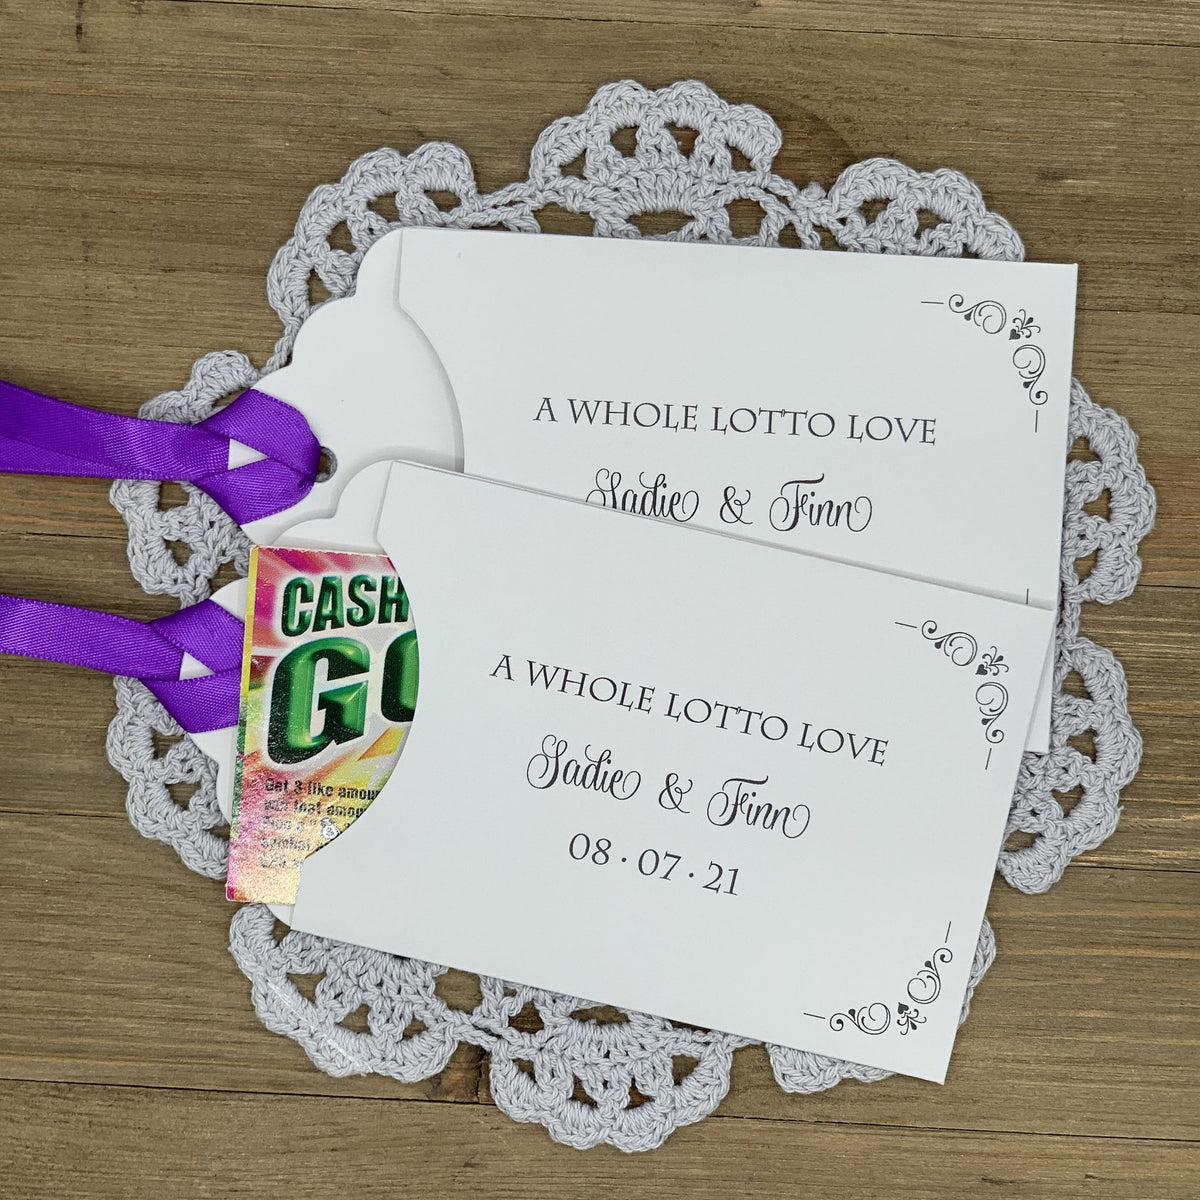 Lucky in love lottery ticket holders for wedding guest favors